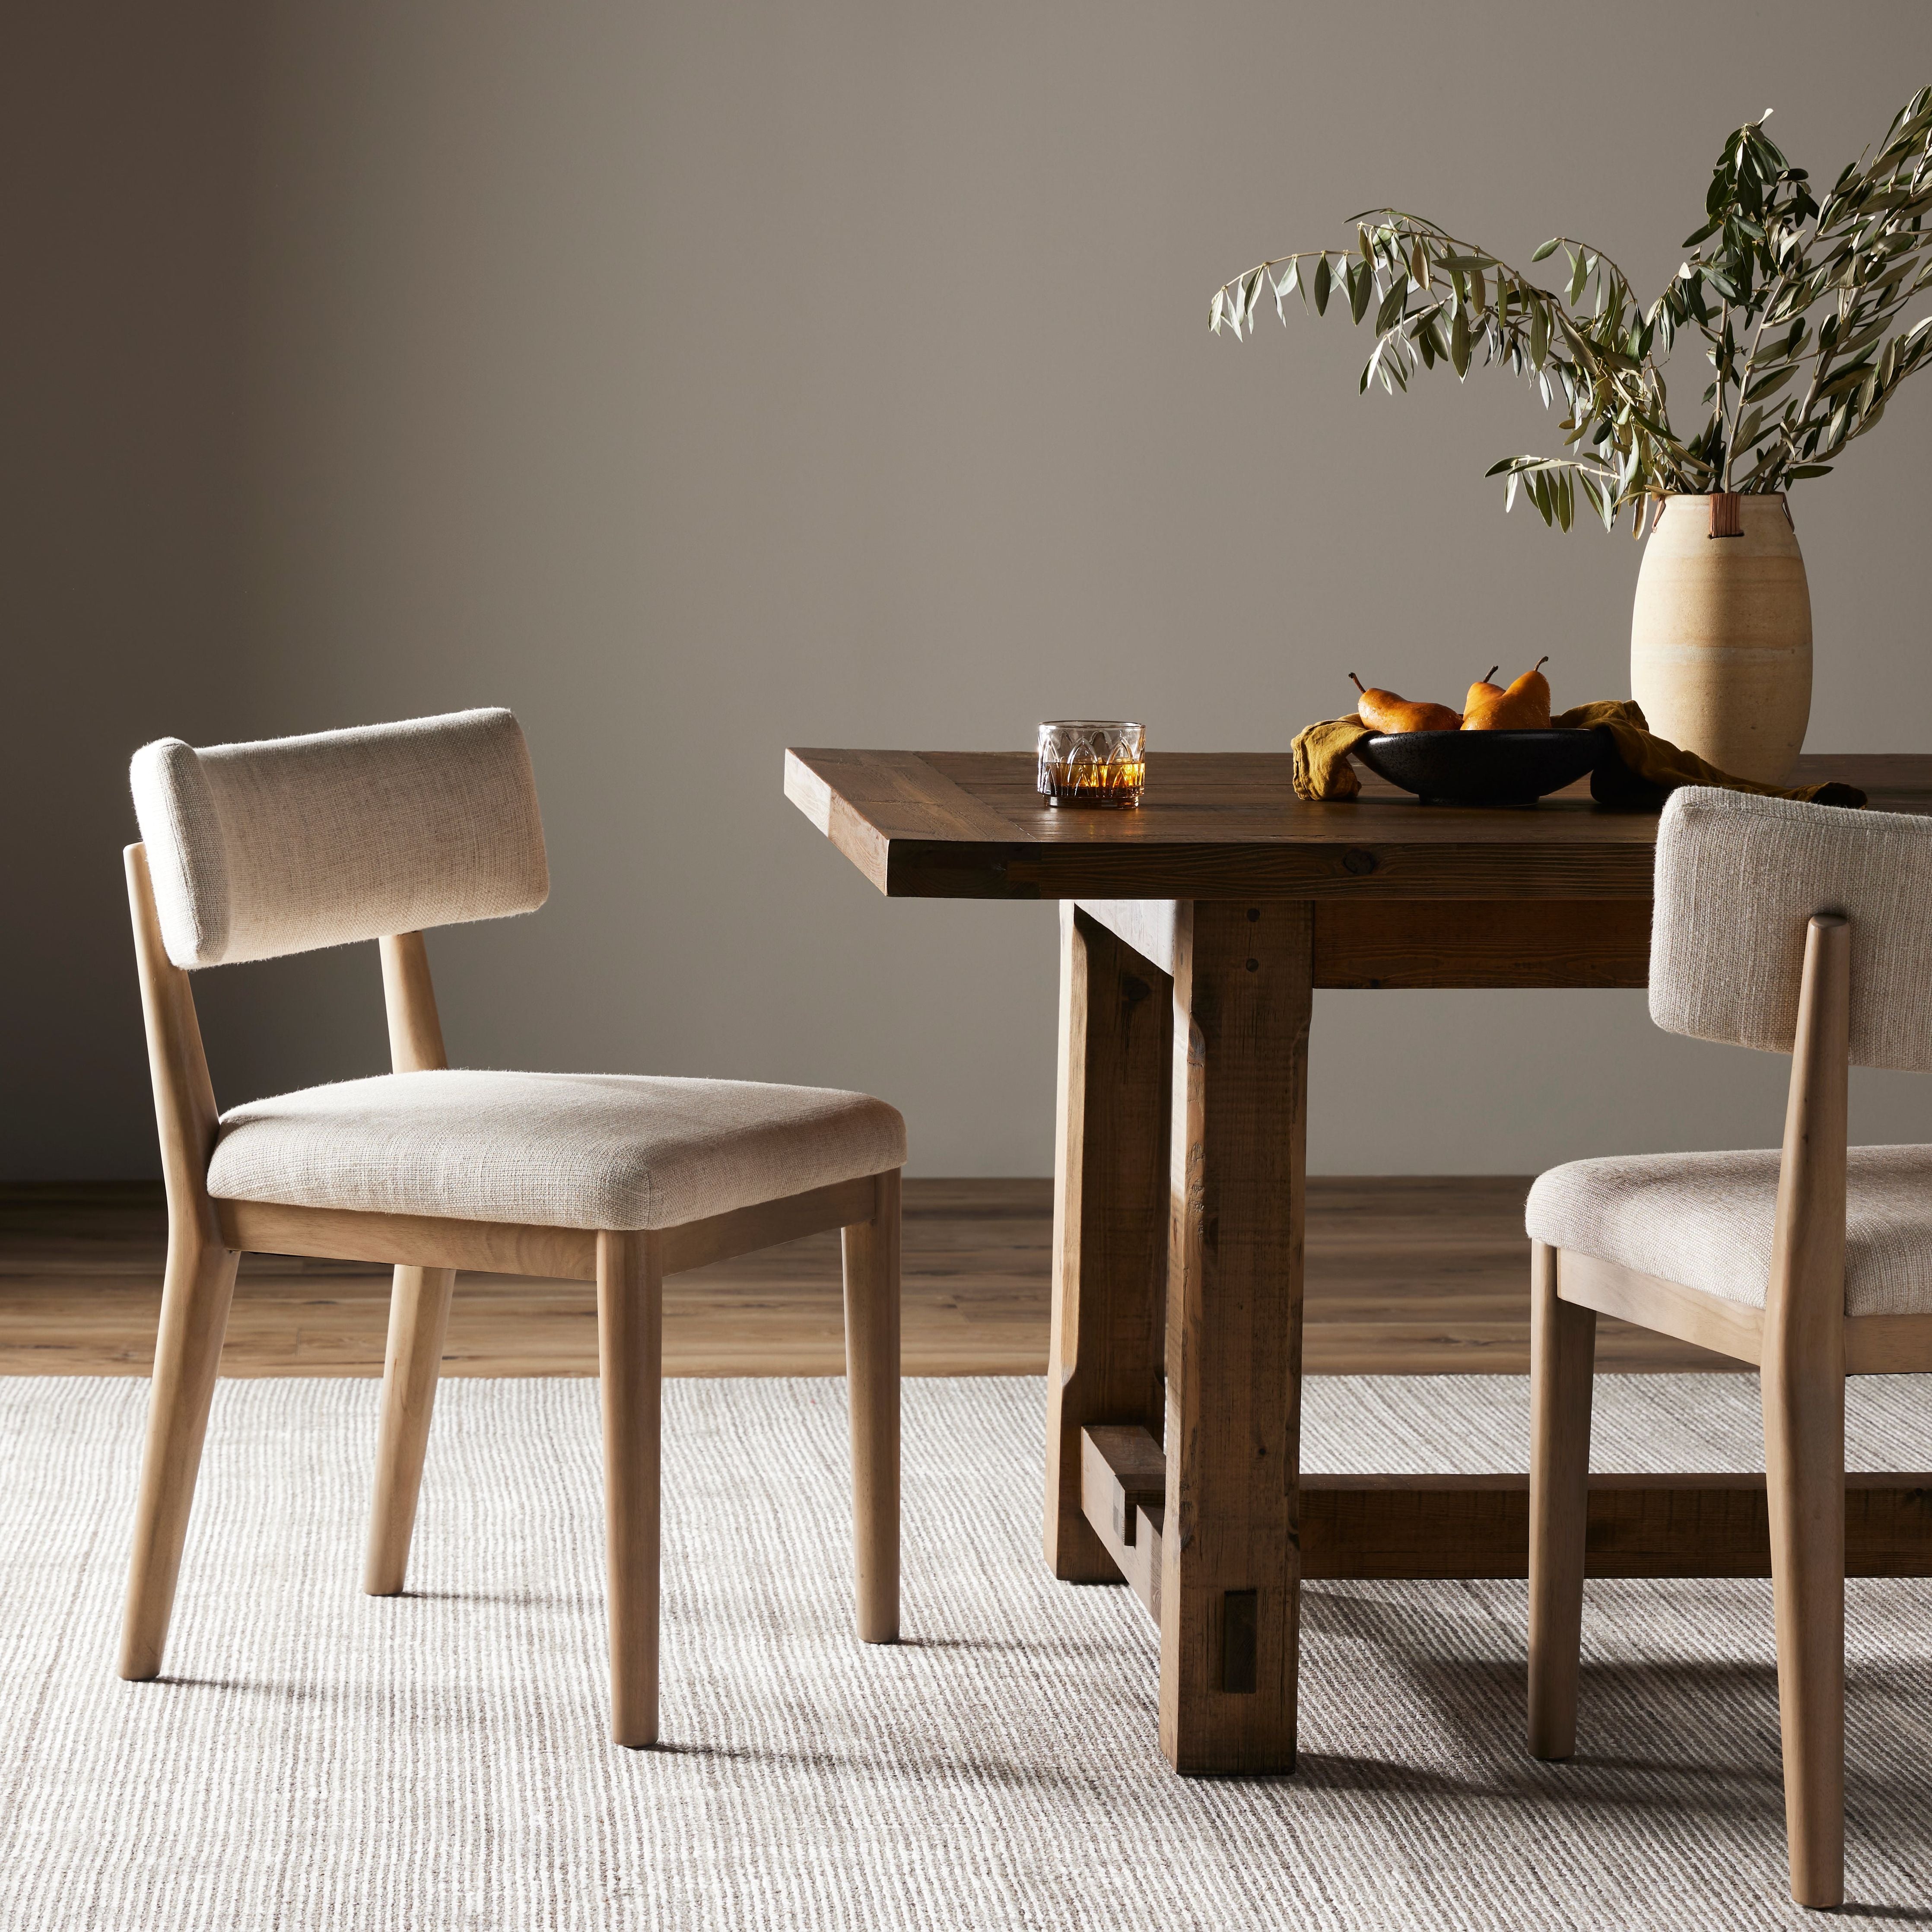 Natural parawood forms a curved barrel back for a shapely take on everyday dining, with textural off-white fabric that moves between styles with ease. Amethyst Home provides interior design, new construction, custom furniture, and area rugs in the Boston metro area.